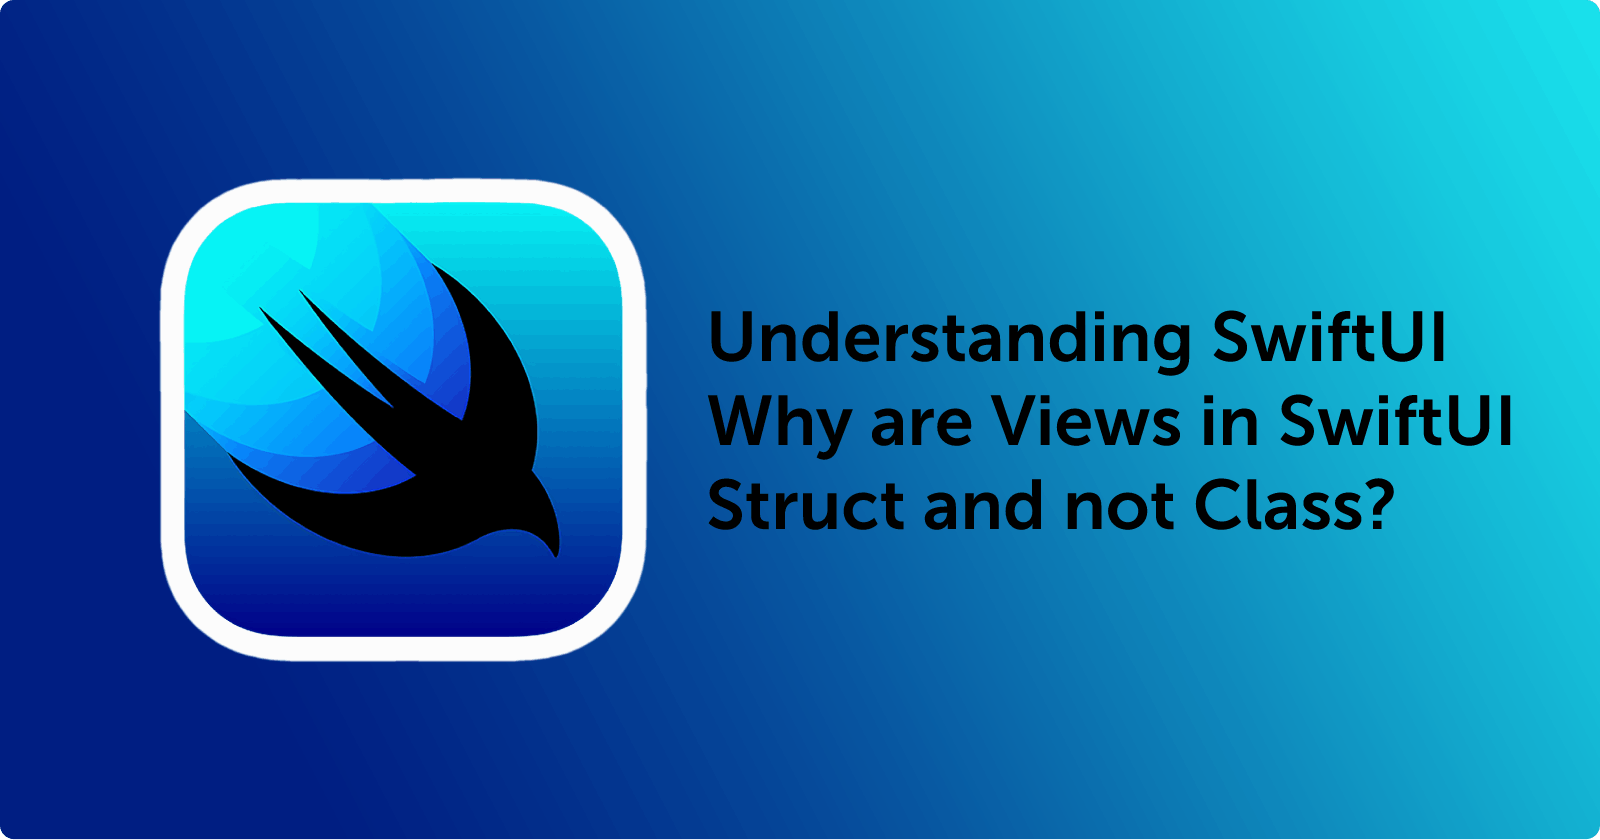 Understanding SwiftUI - Why are Views in SwiftUI Struct and not Class?